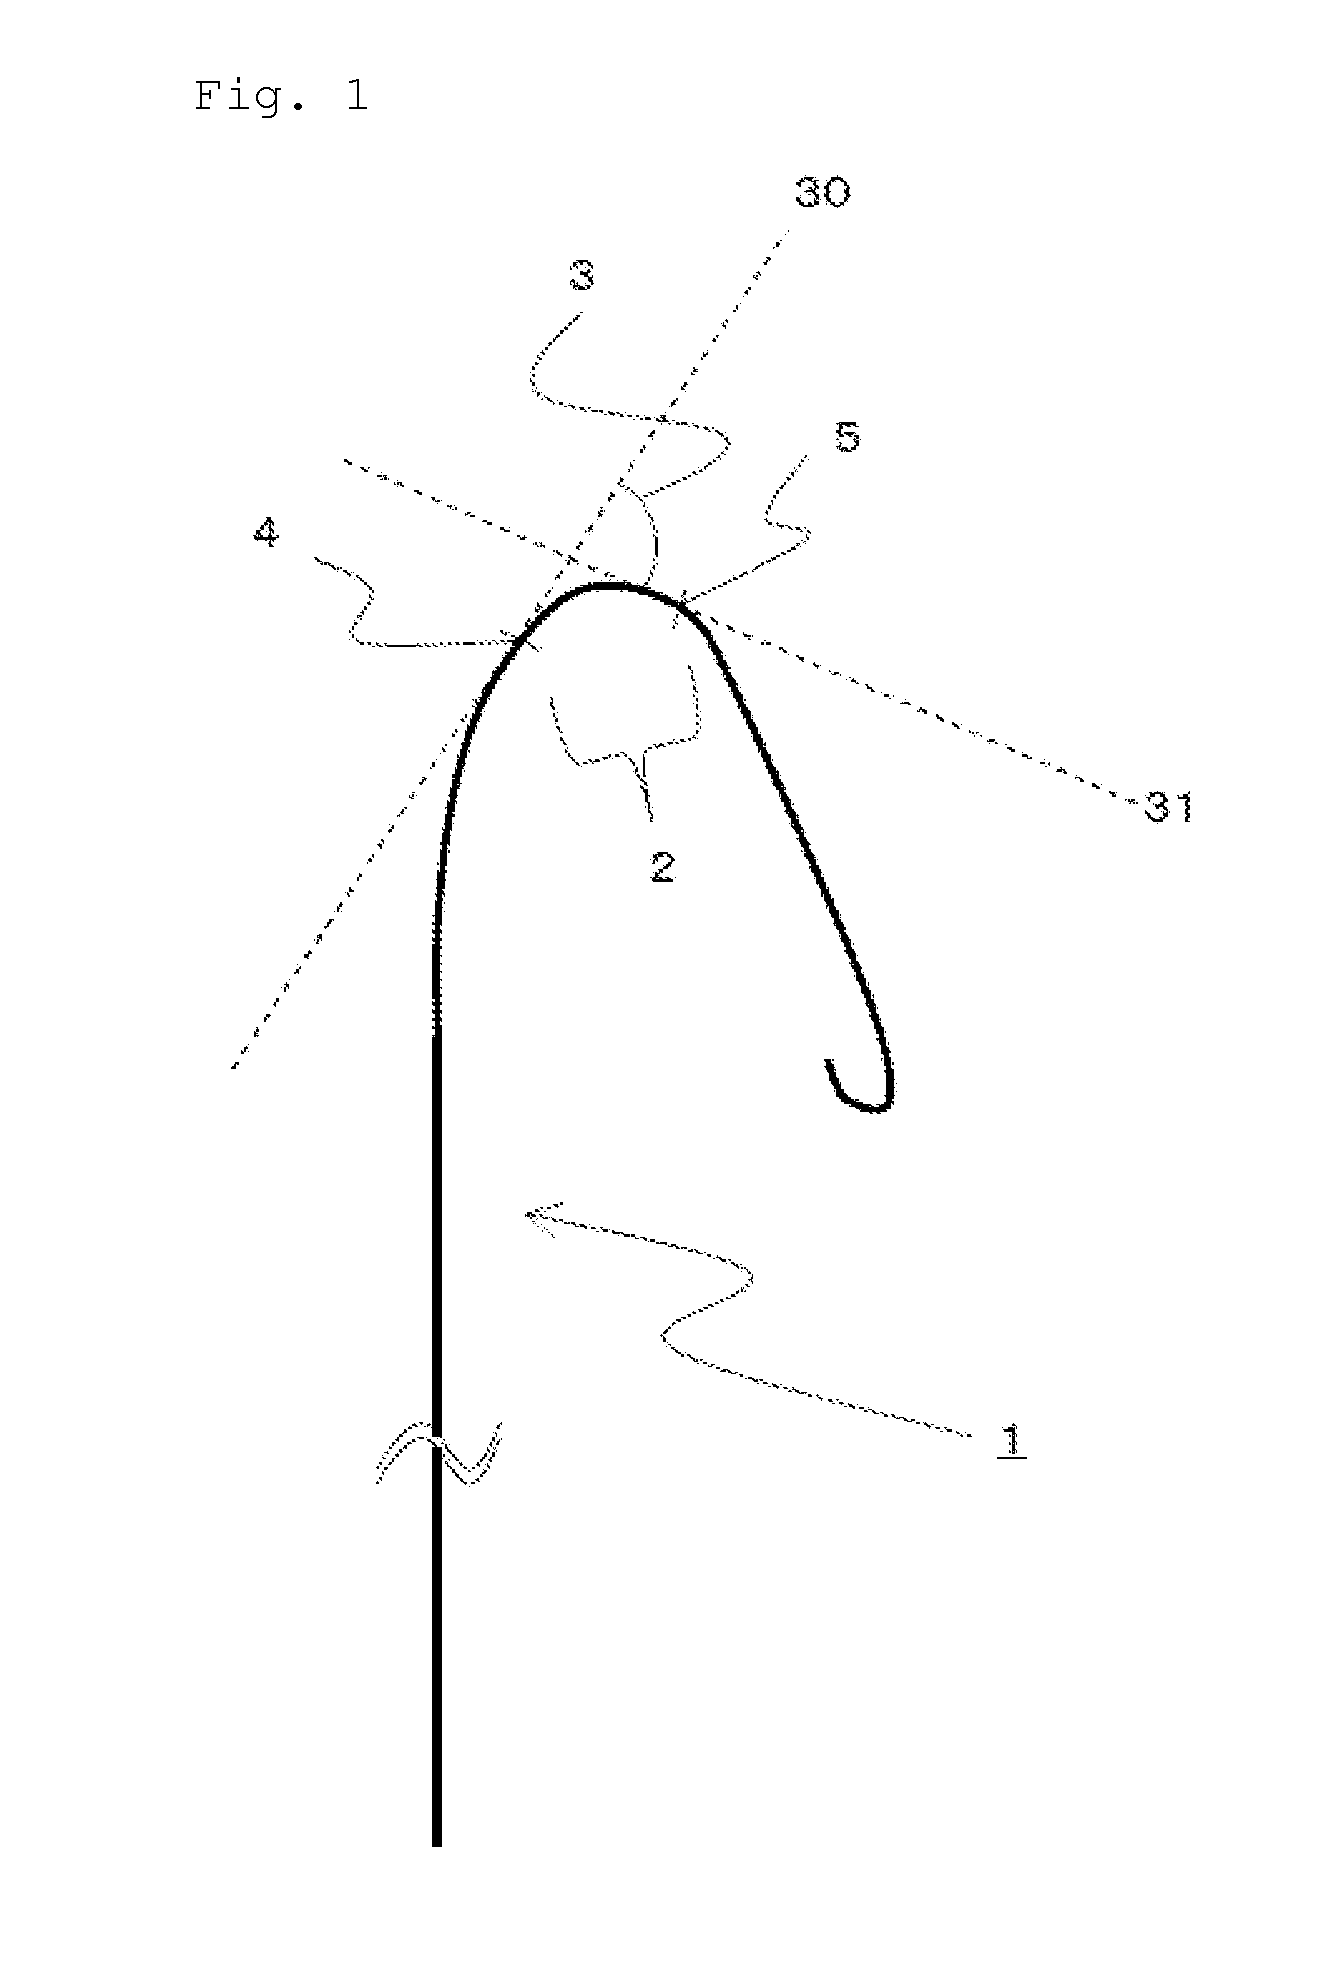 Guidewire and ablation catheter system with balloon having the same